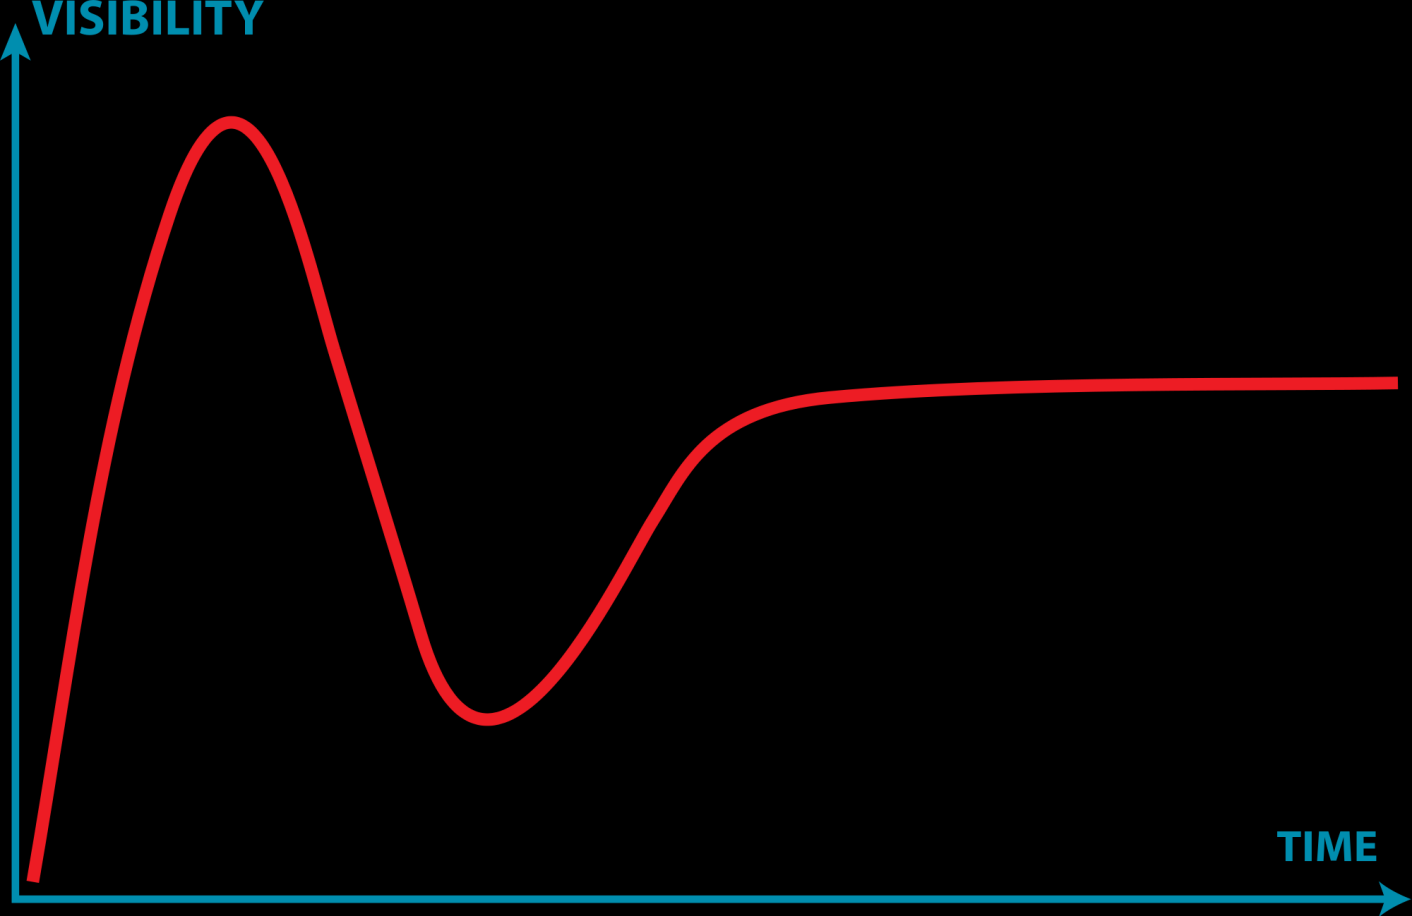 Gartner s hype cycle The hype cycle is a graphical representation of the life cycle stages a technology goes through from conception to maturity and